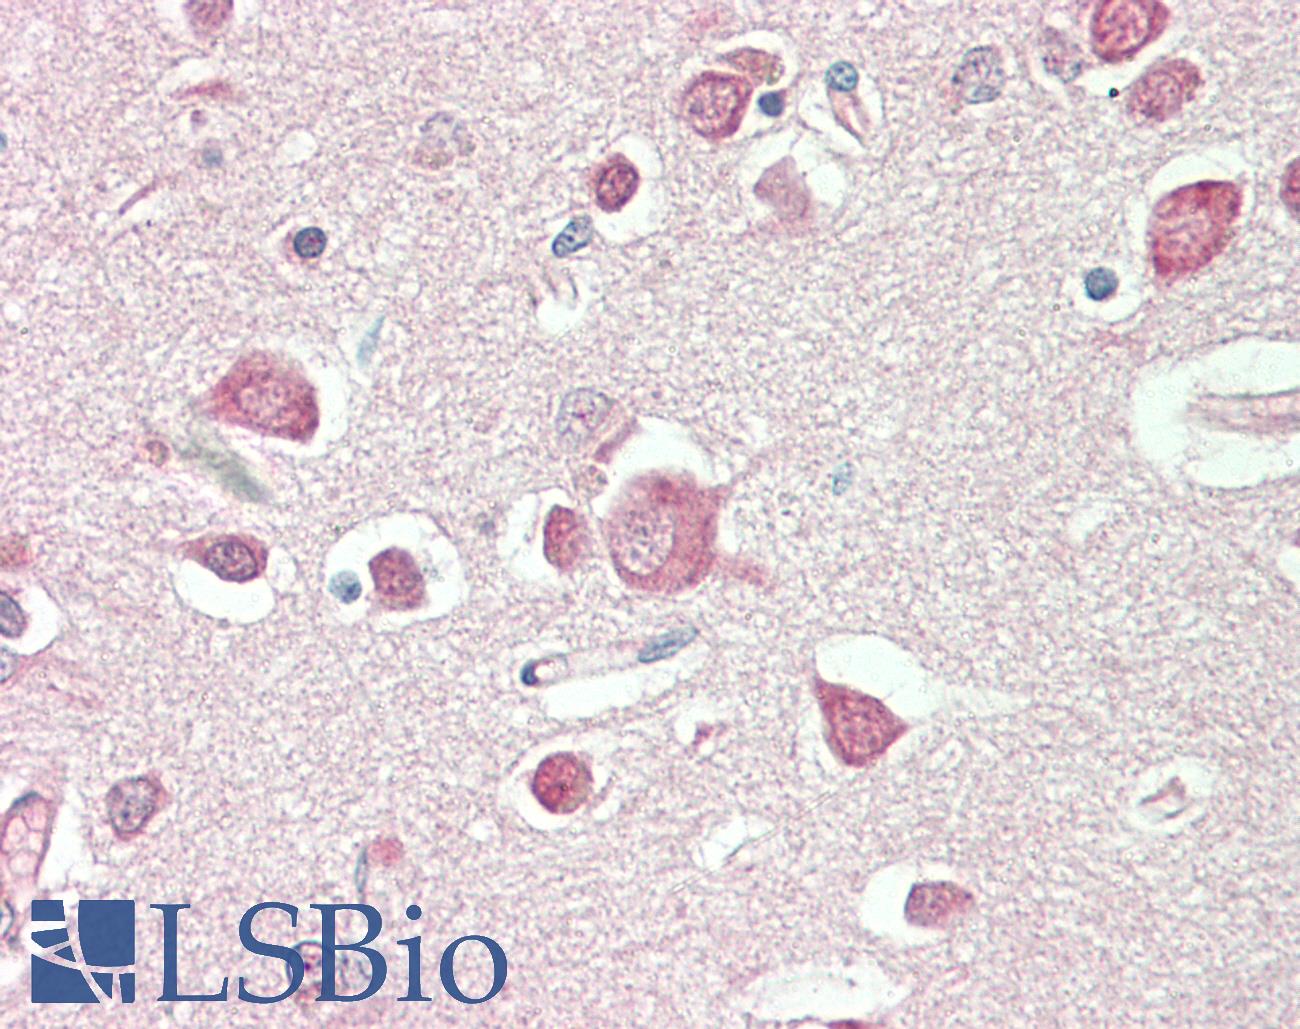 PDE2A Antibody - Anti-PDE2 / PDE2A antibody IHC staining of human brain, cortex. Immunohistochemistry of formalin-fixed, paraffin-embedded tissue after heat-induced antigen retrieval. Antibody dilution 1:50.